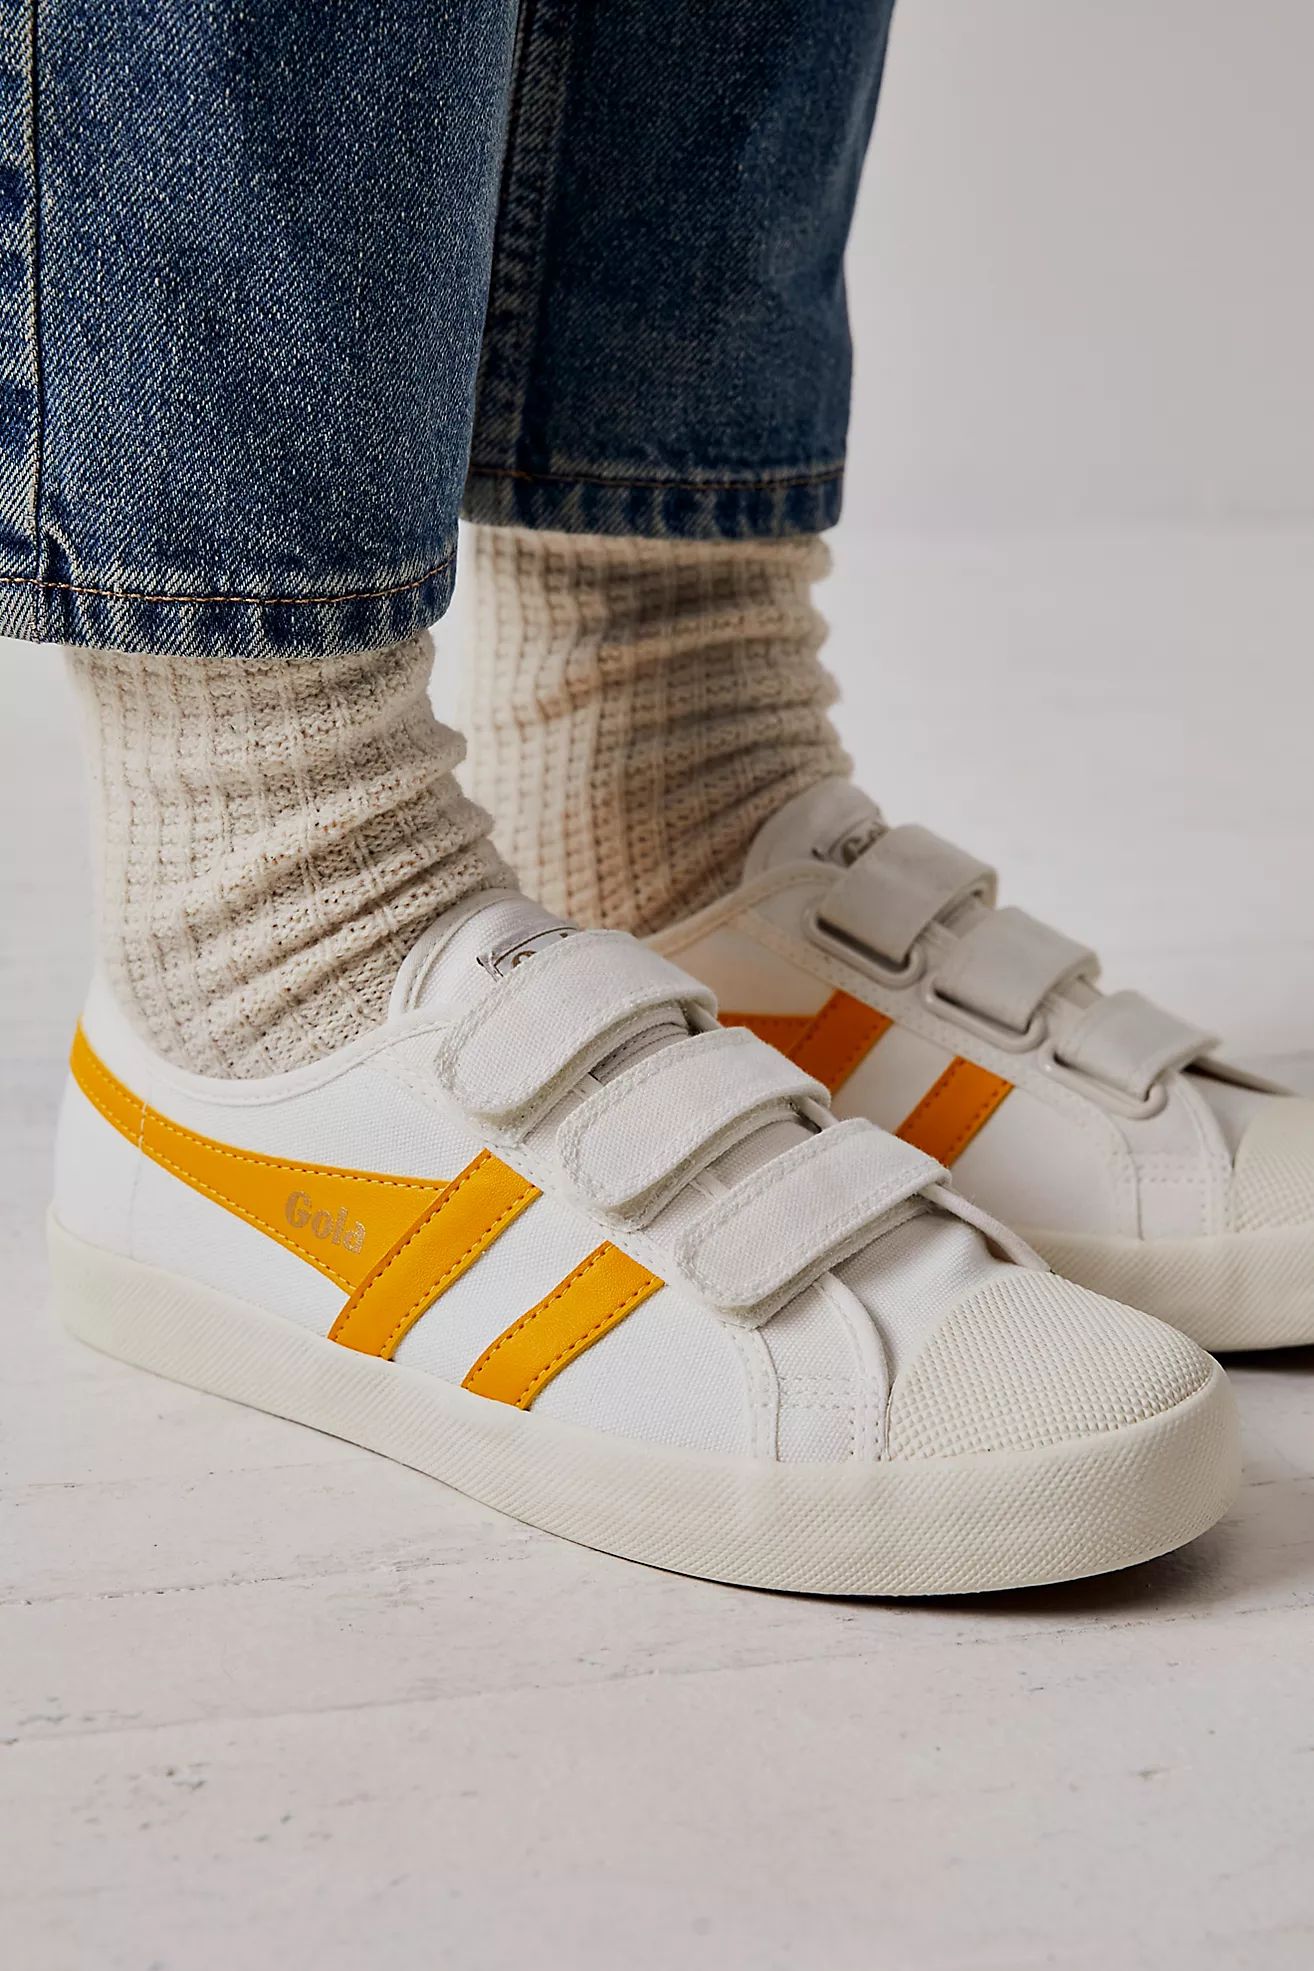 Gola Coastra 3-Strap Sneakers | Free People (Global - UK&FR Excluded)